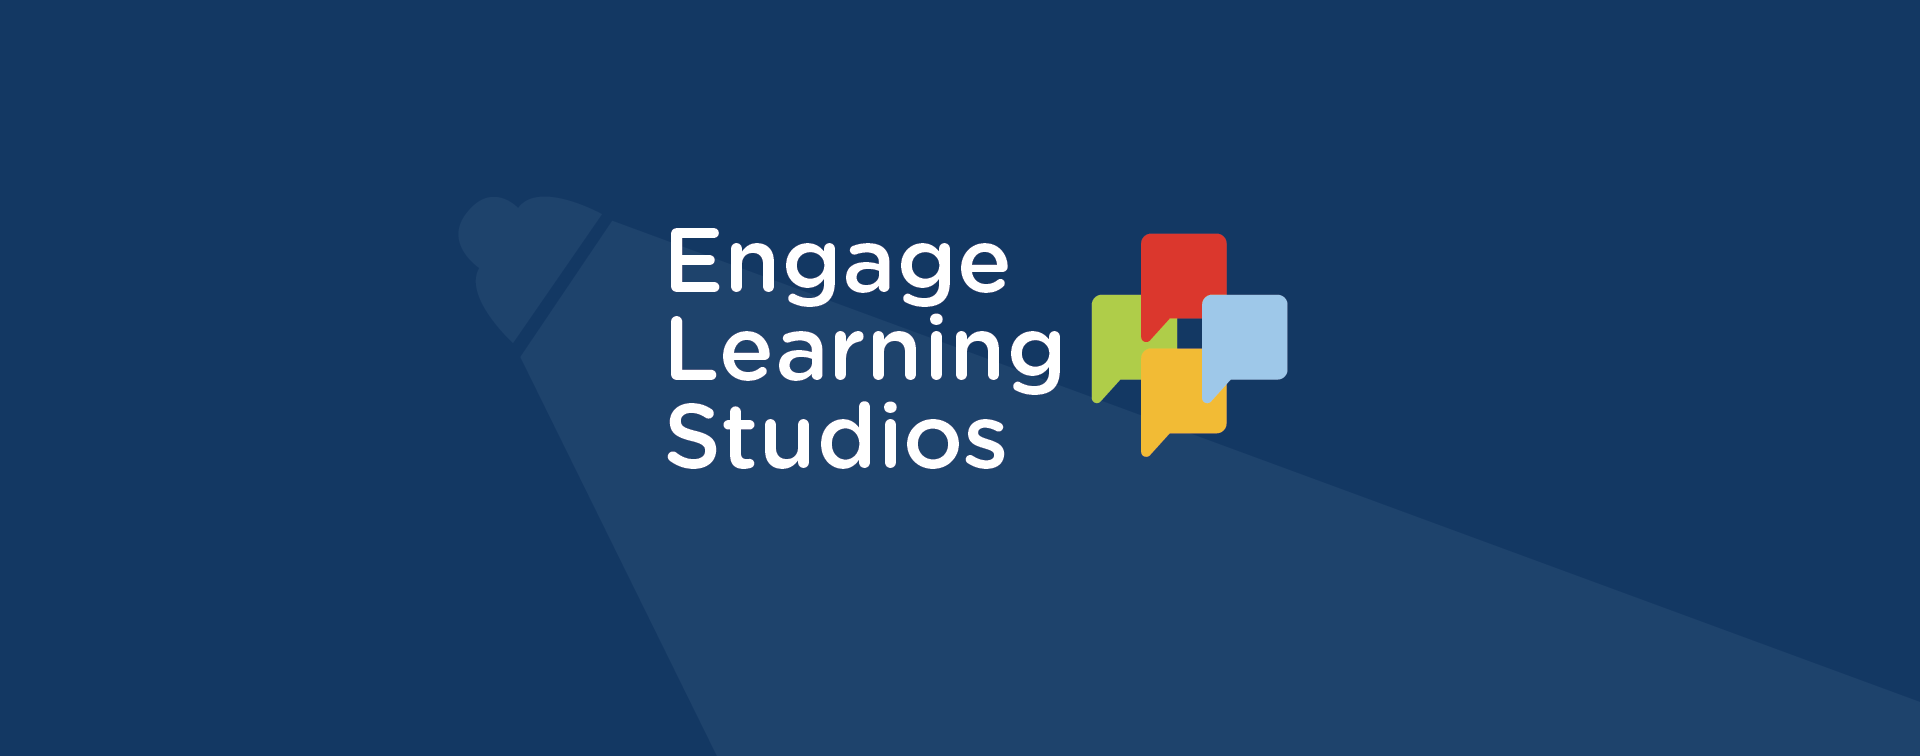 Picture that reads "Engage Learning Studios"